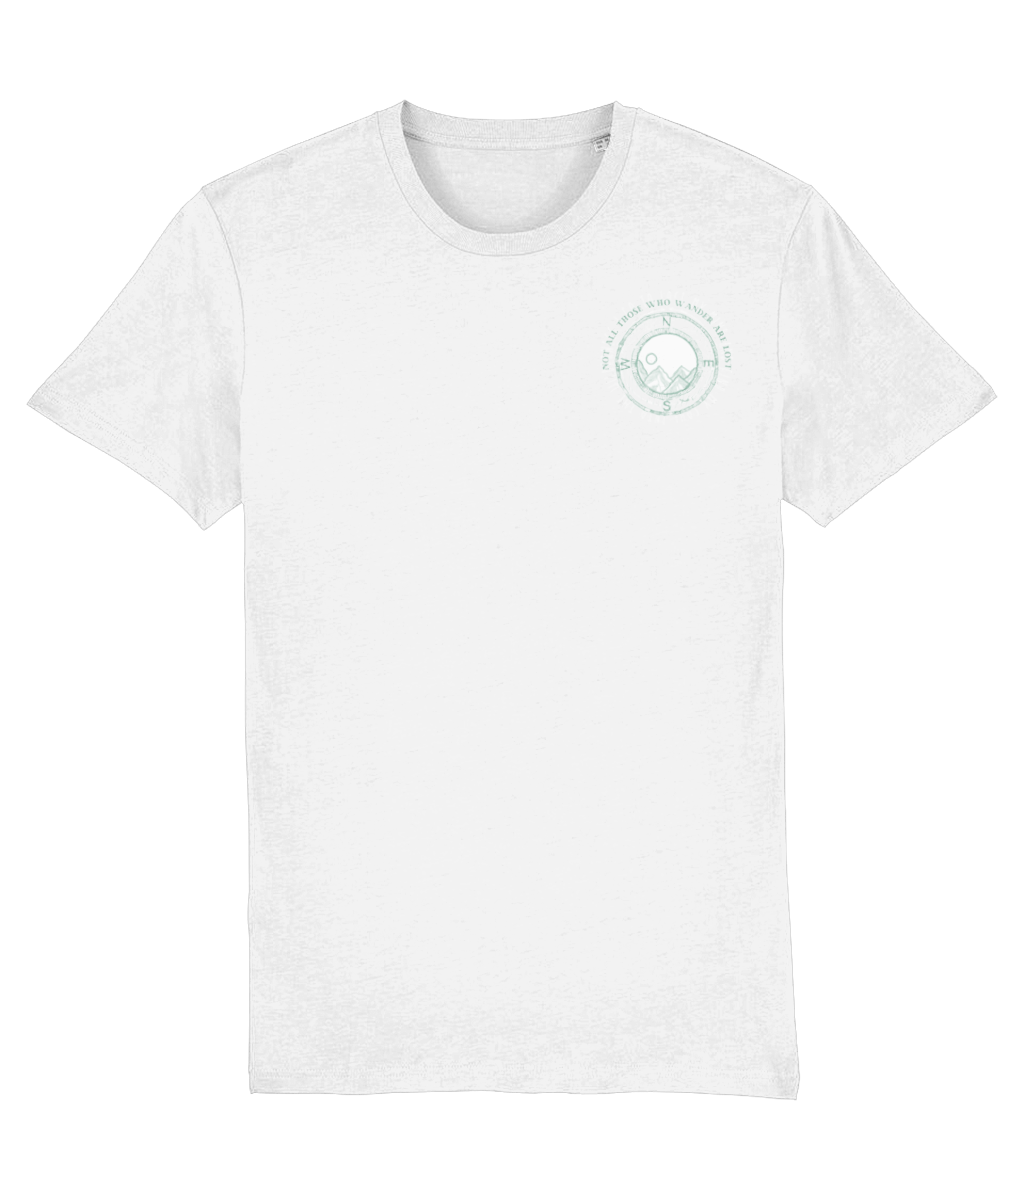 Not All Those Who Wander Are Lost Unisex Organic Cotton T-shirt